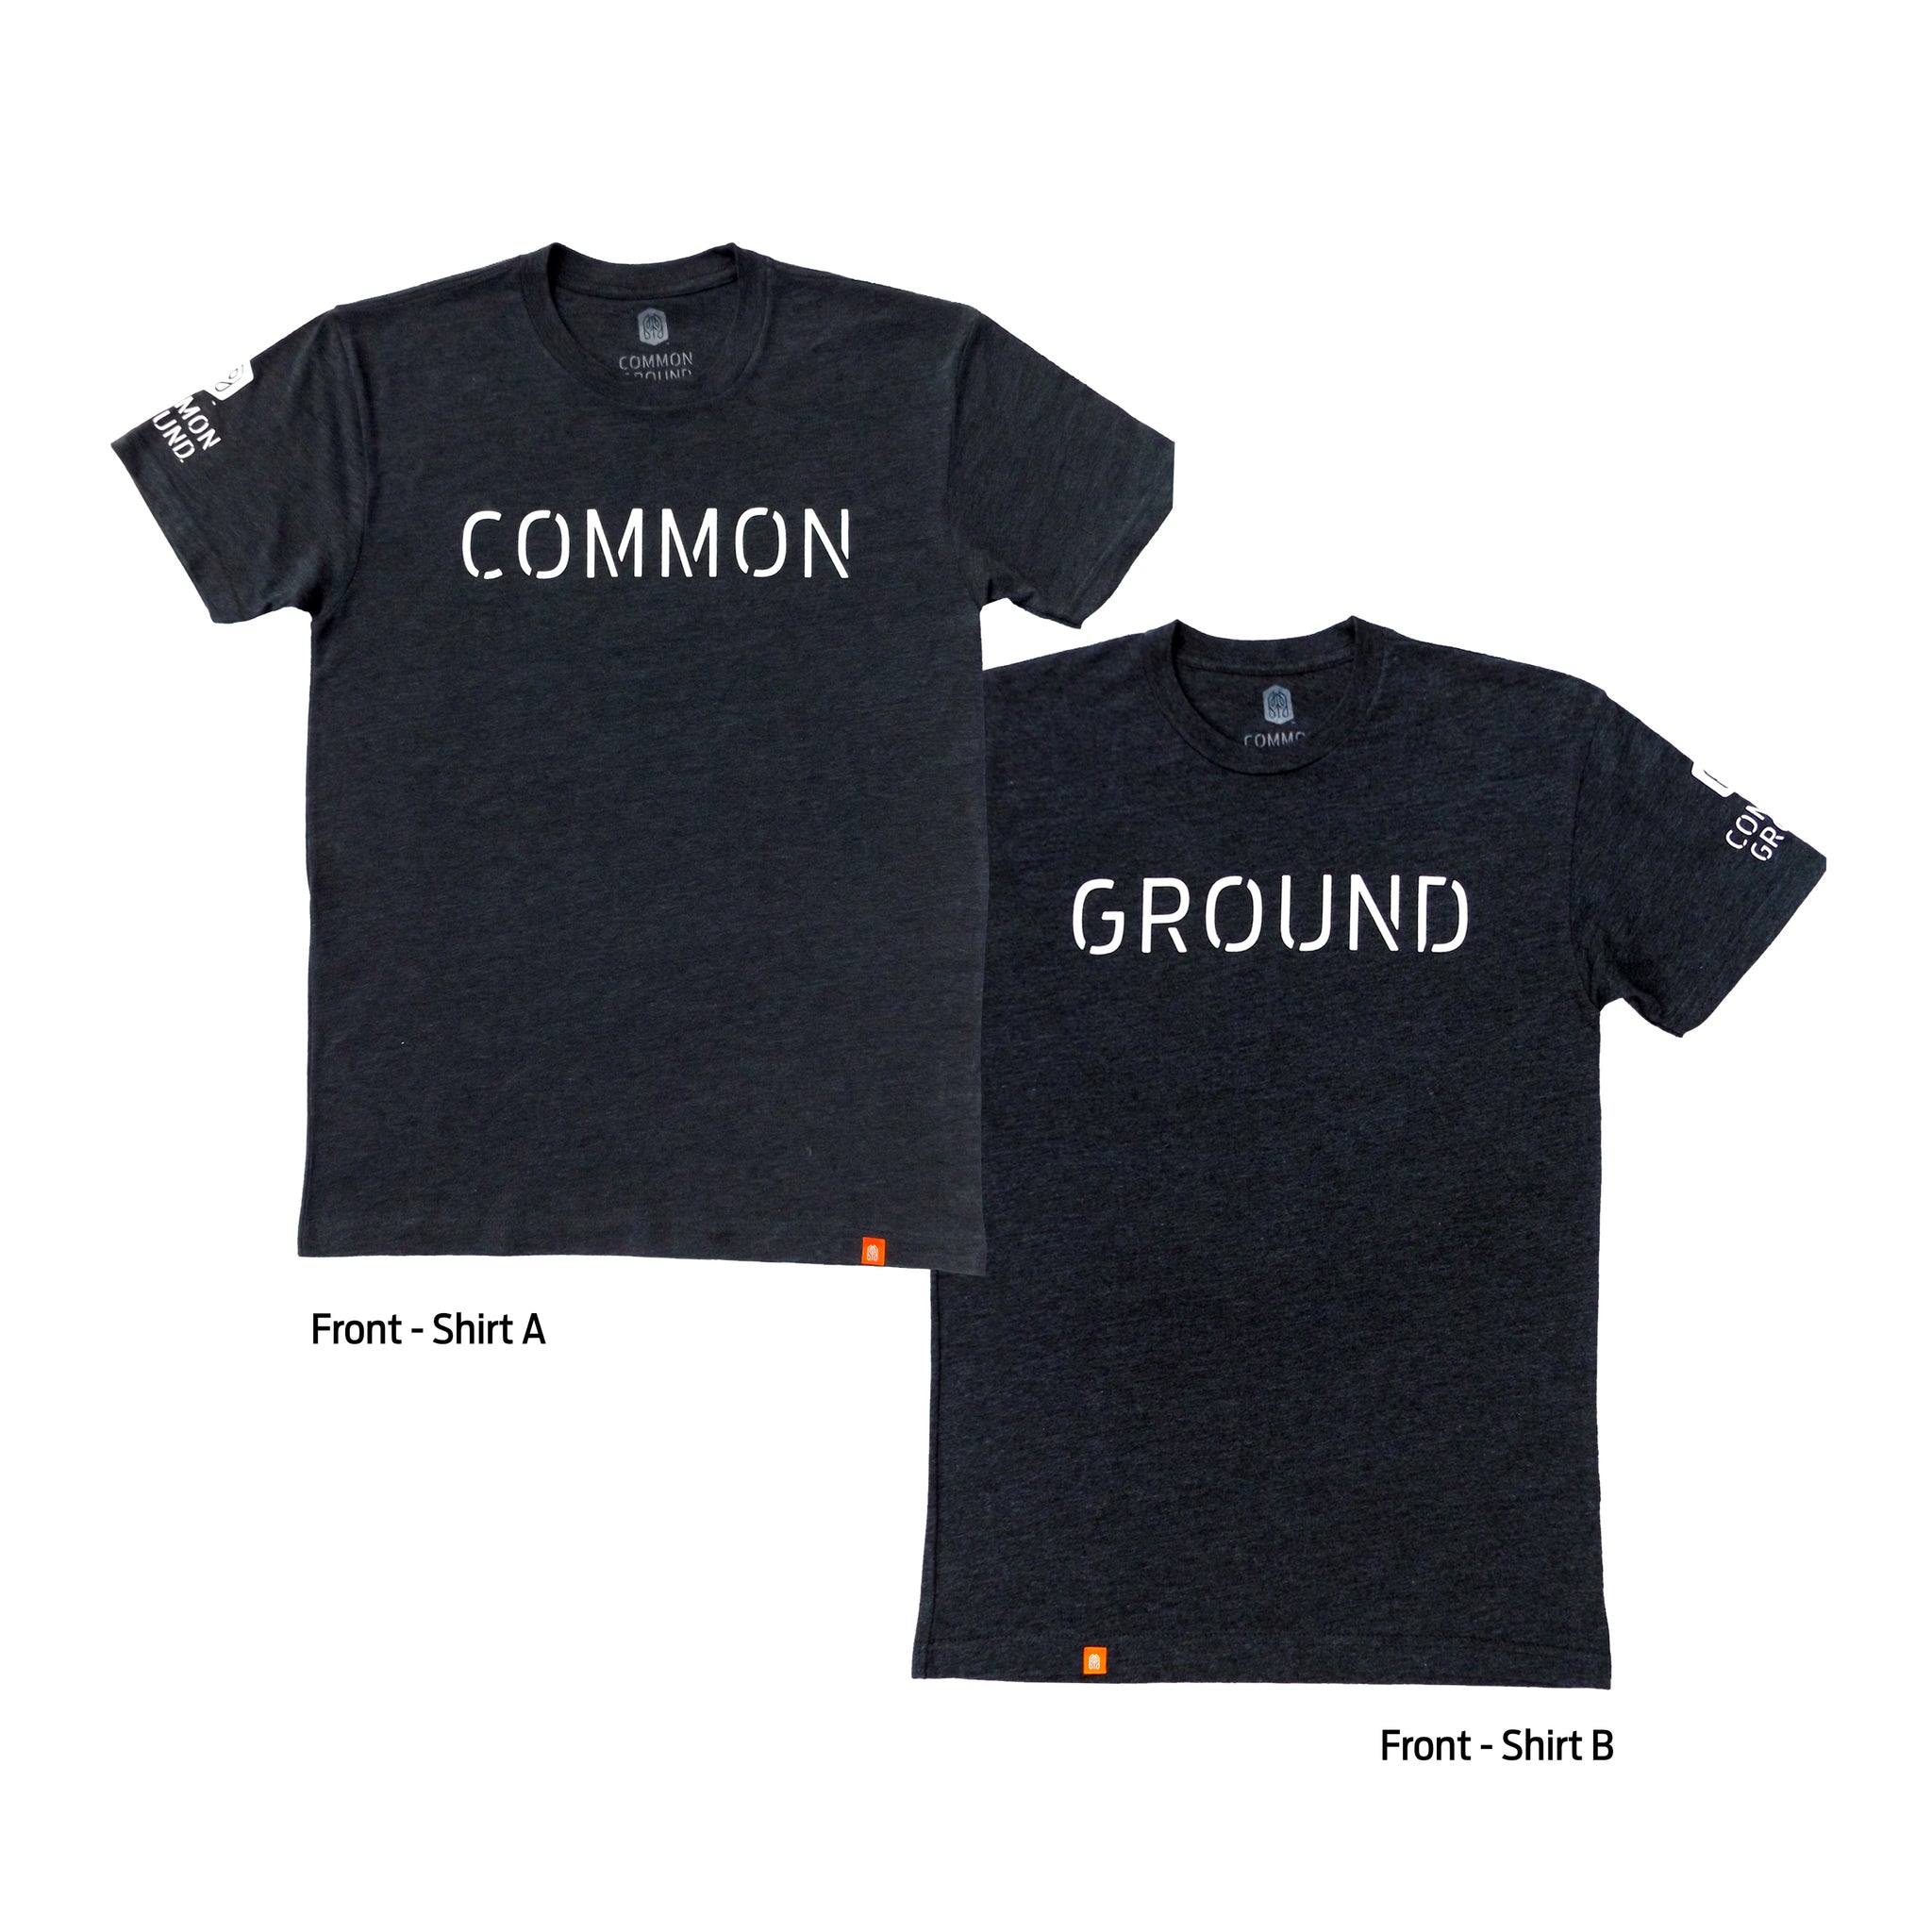 Charcoal - Common Ground T shirt Front View